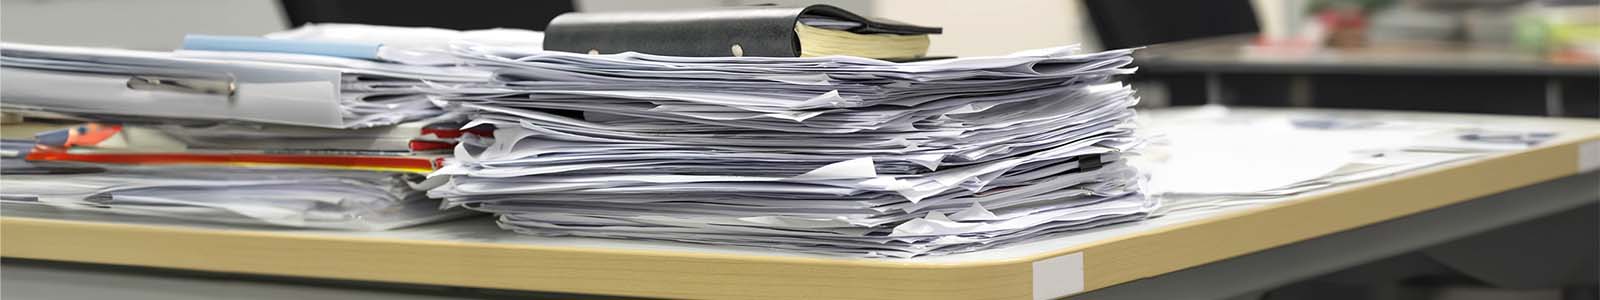 Paper Clutter for onboarding a new hire without a Digital Document Management System